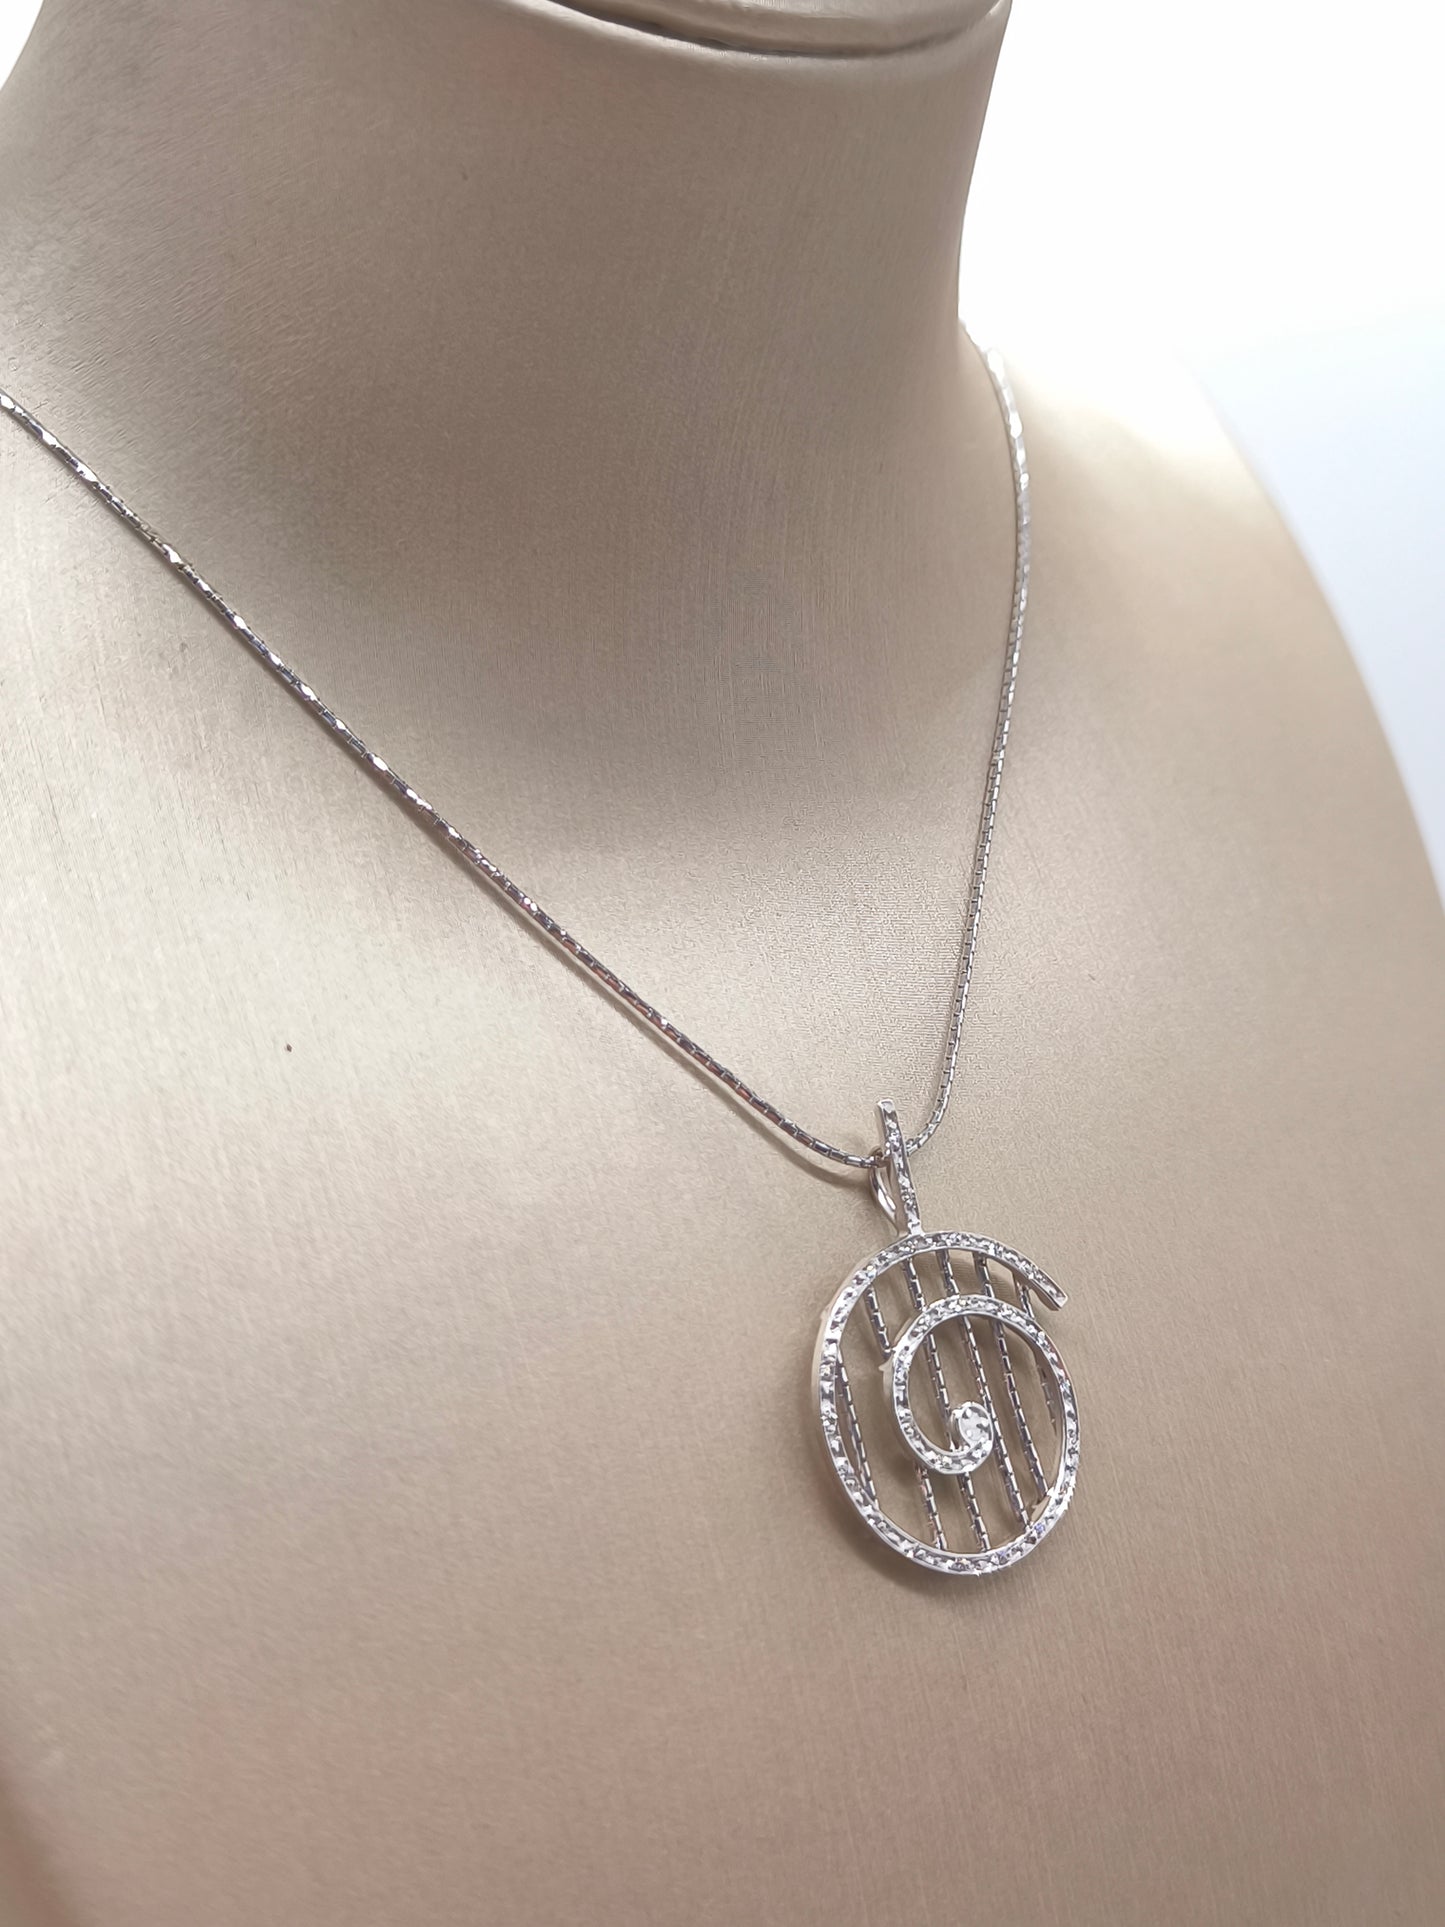 Recarlo necklace in gold with spiral diamonds